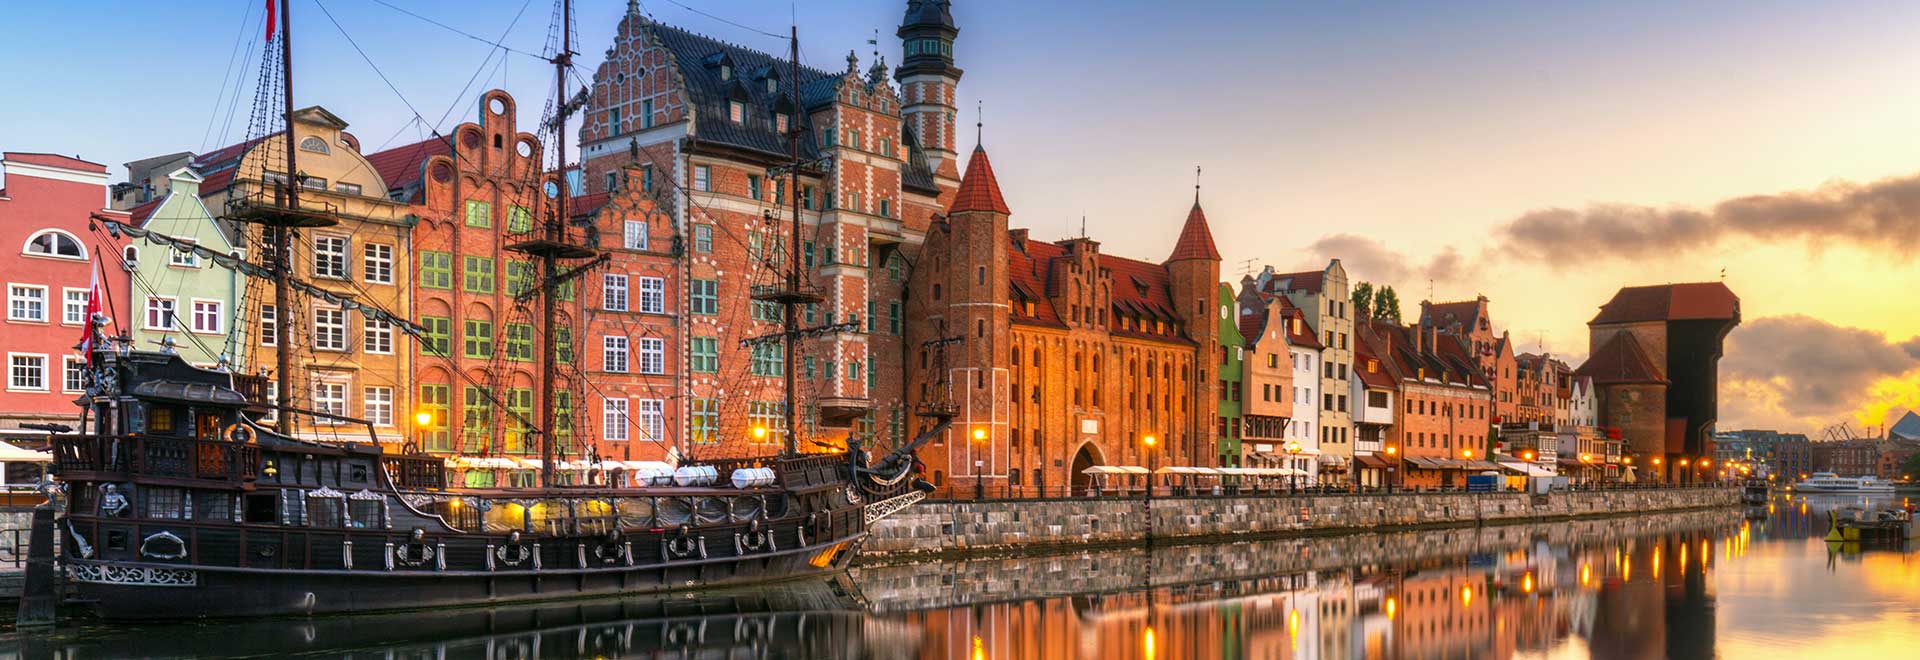 Europe Poland Gdansk Old Town MH